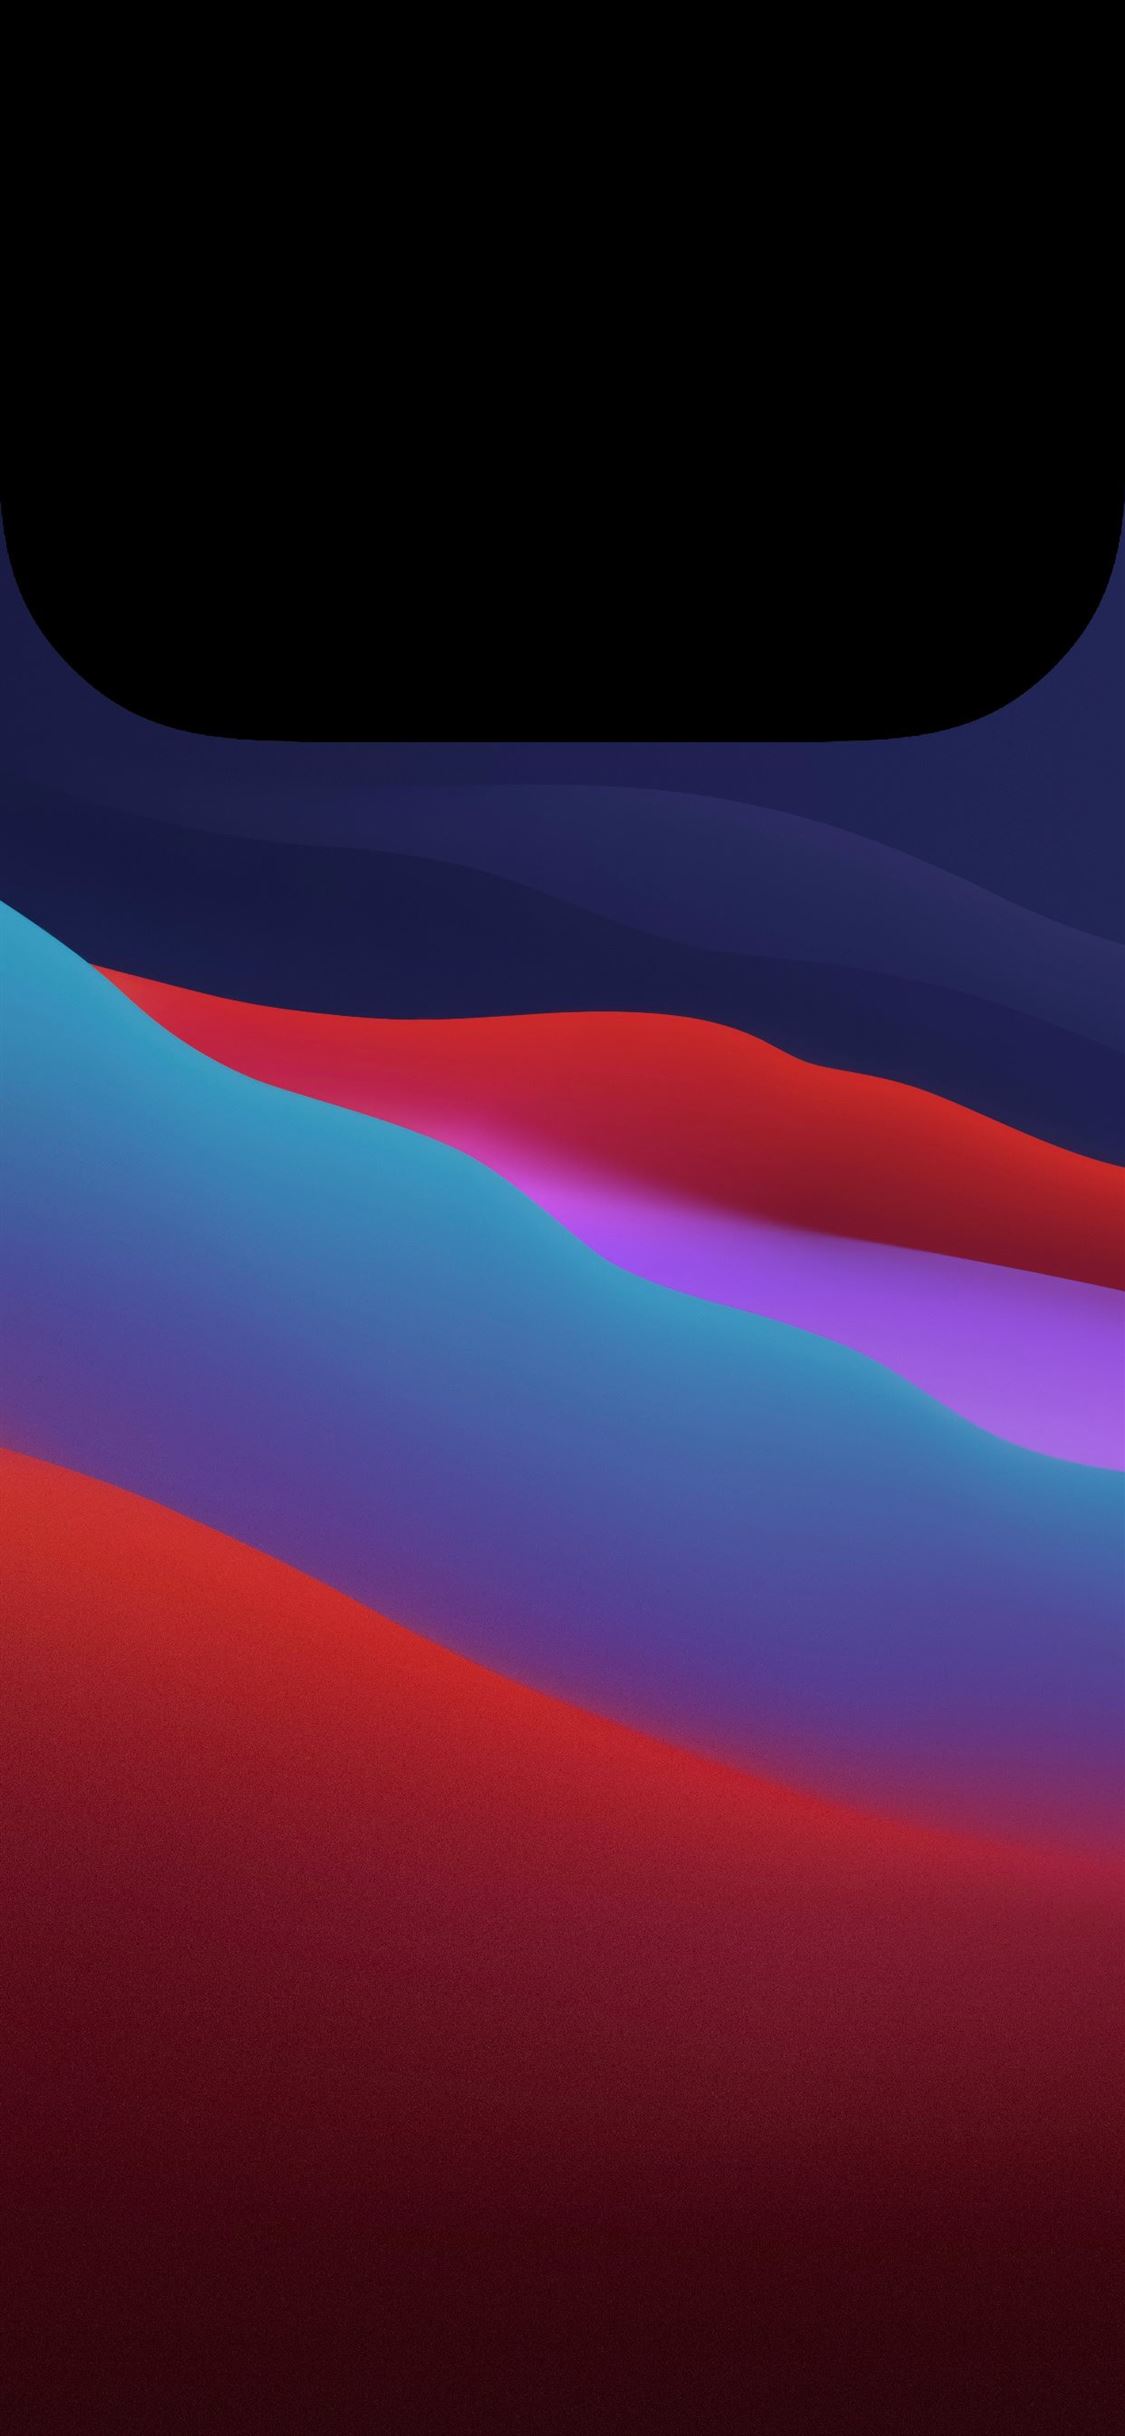 Aesthetic Iphone X Wallpapers